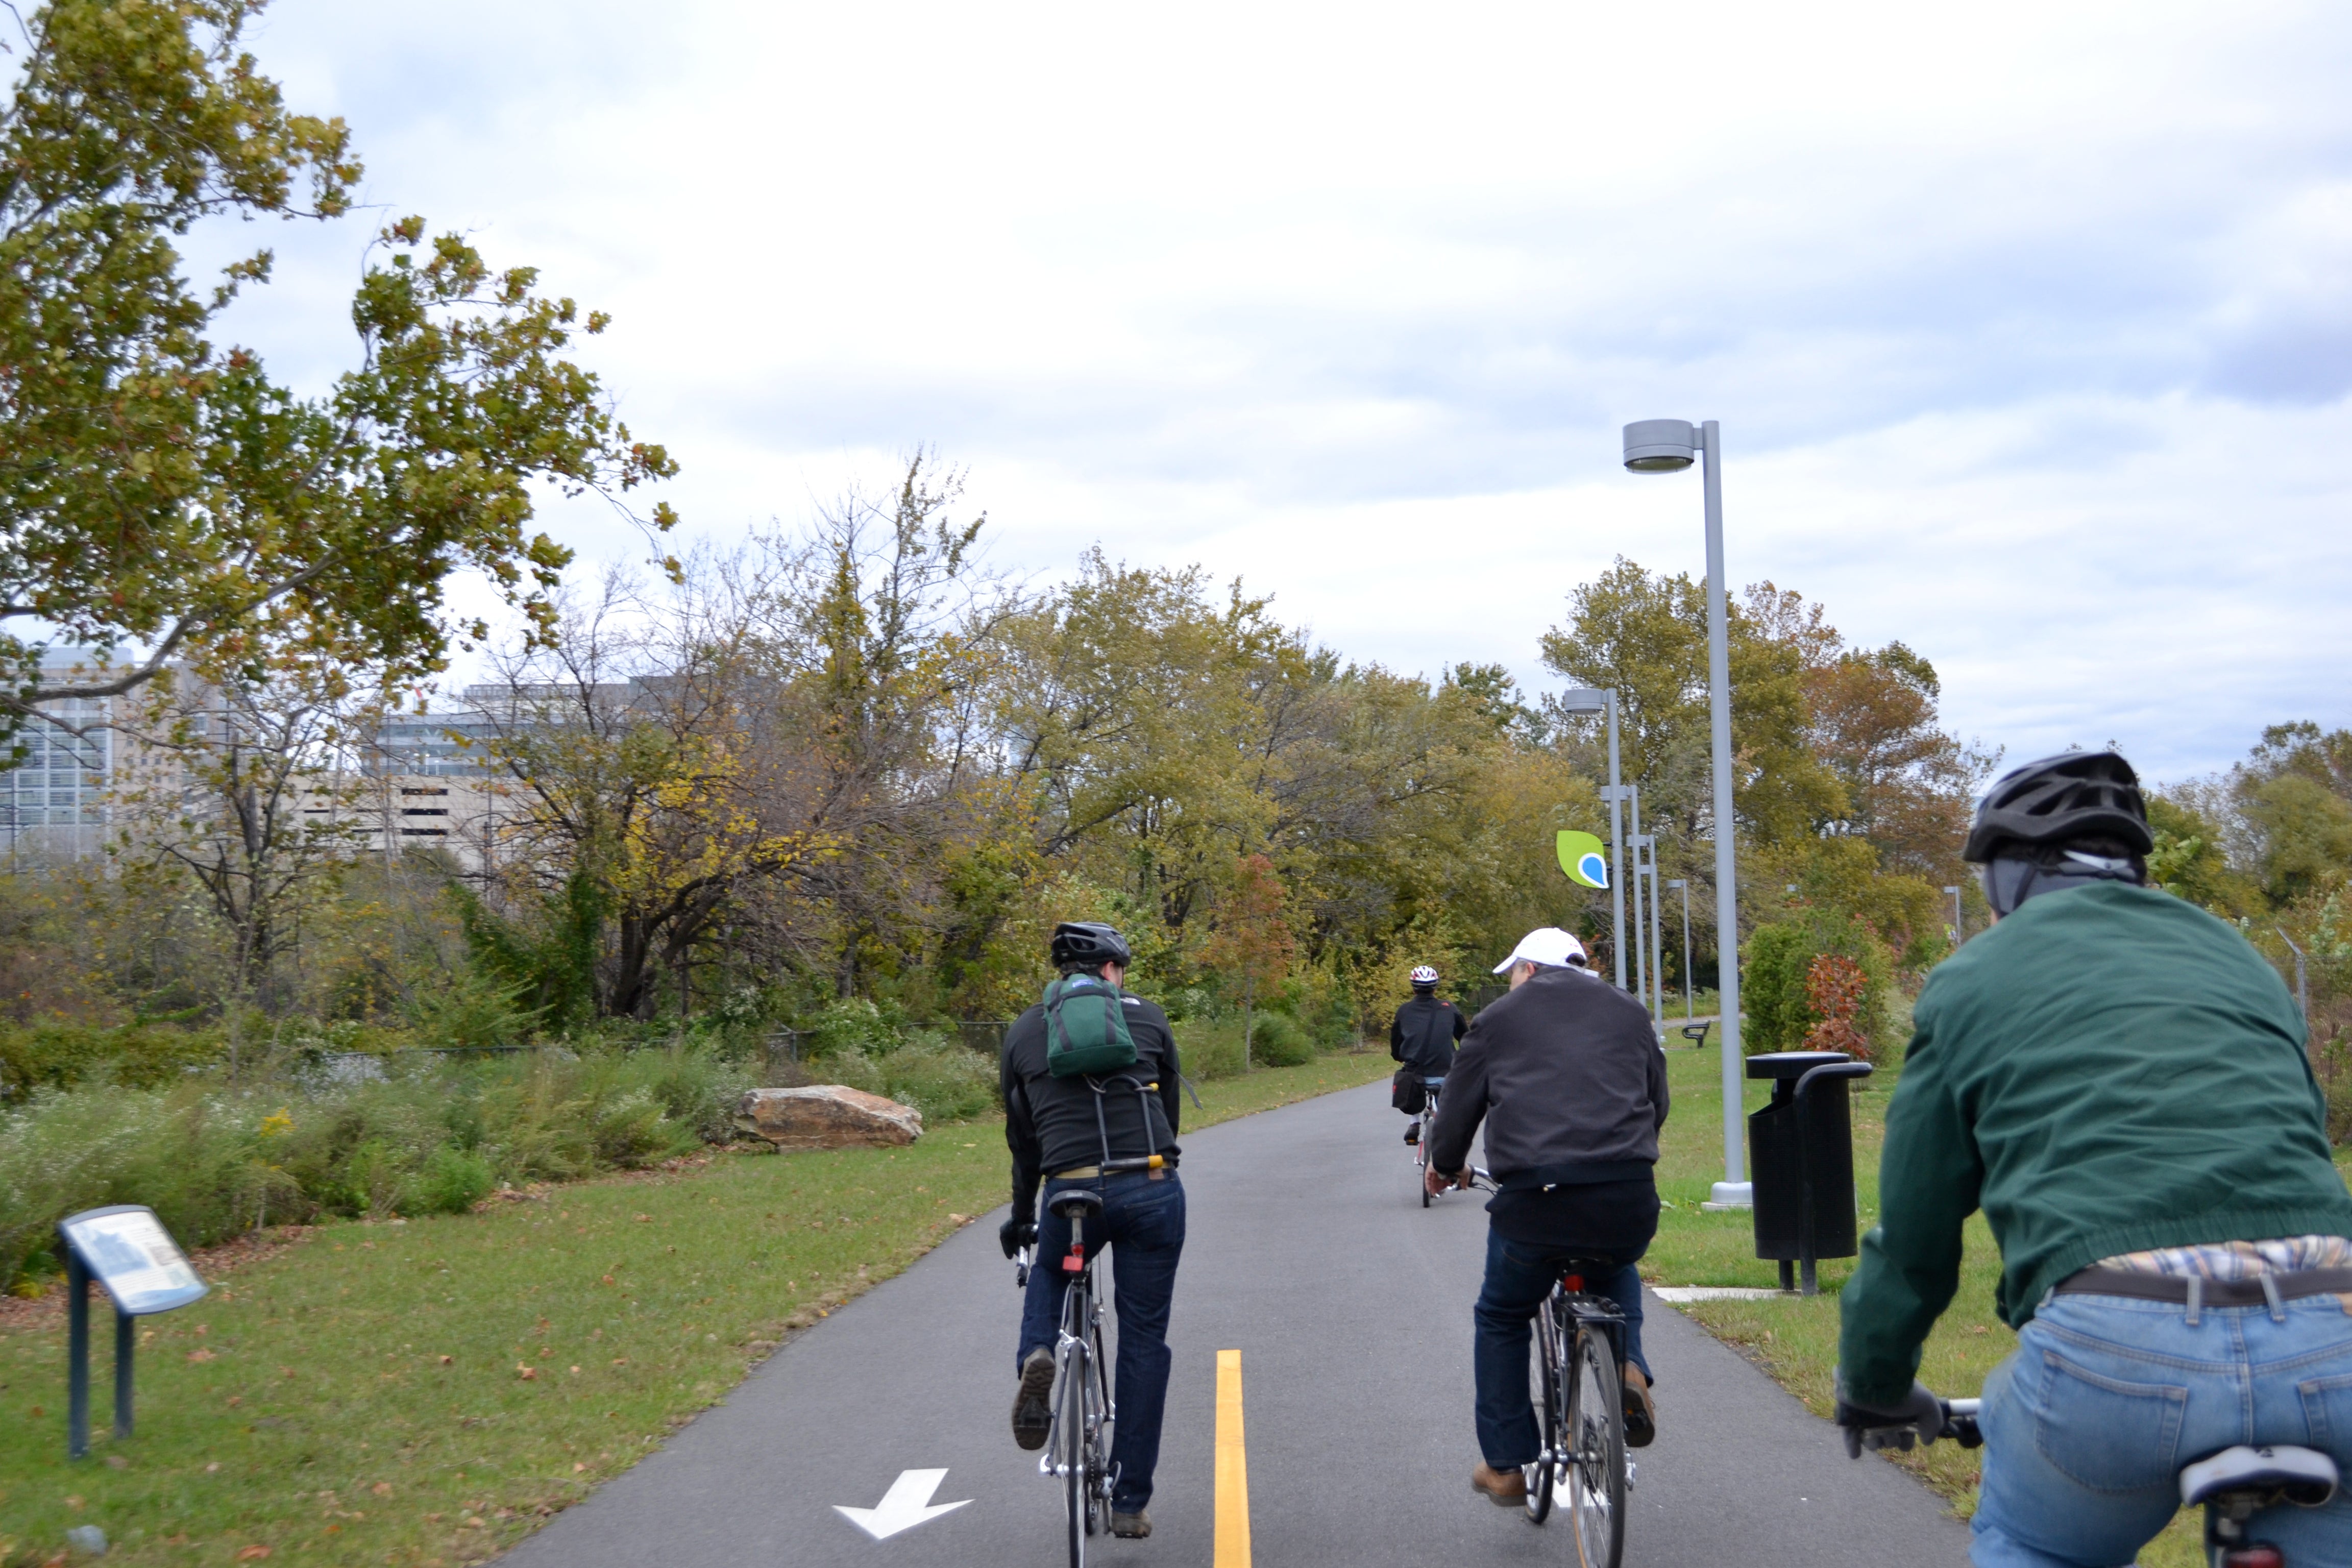 Grays Ferry Crescent, now the southern most portion of the Schuylkill River Trail will soon lead into Bartram's Mile